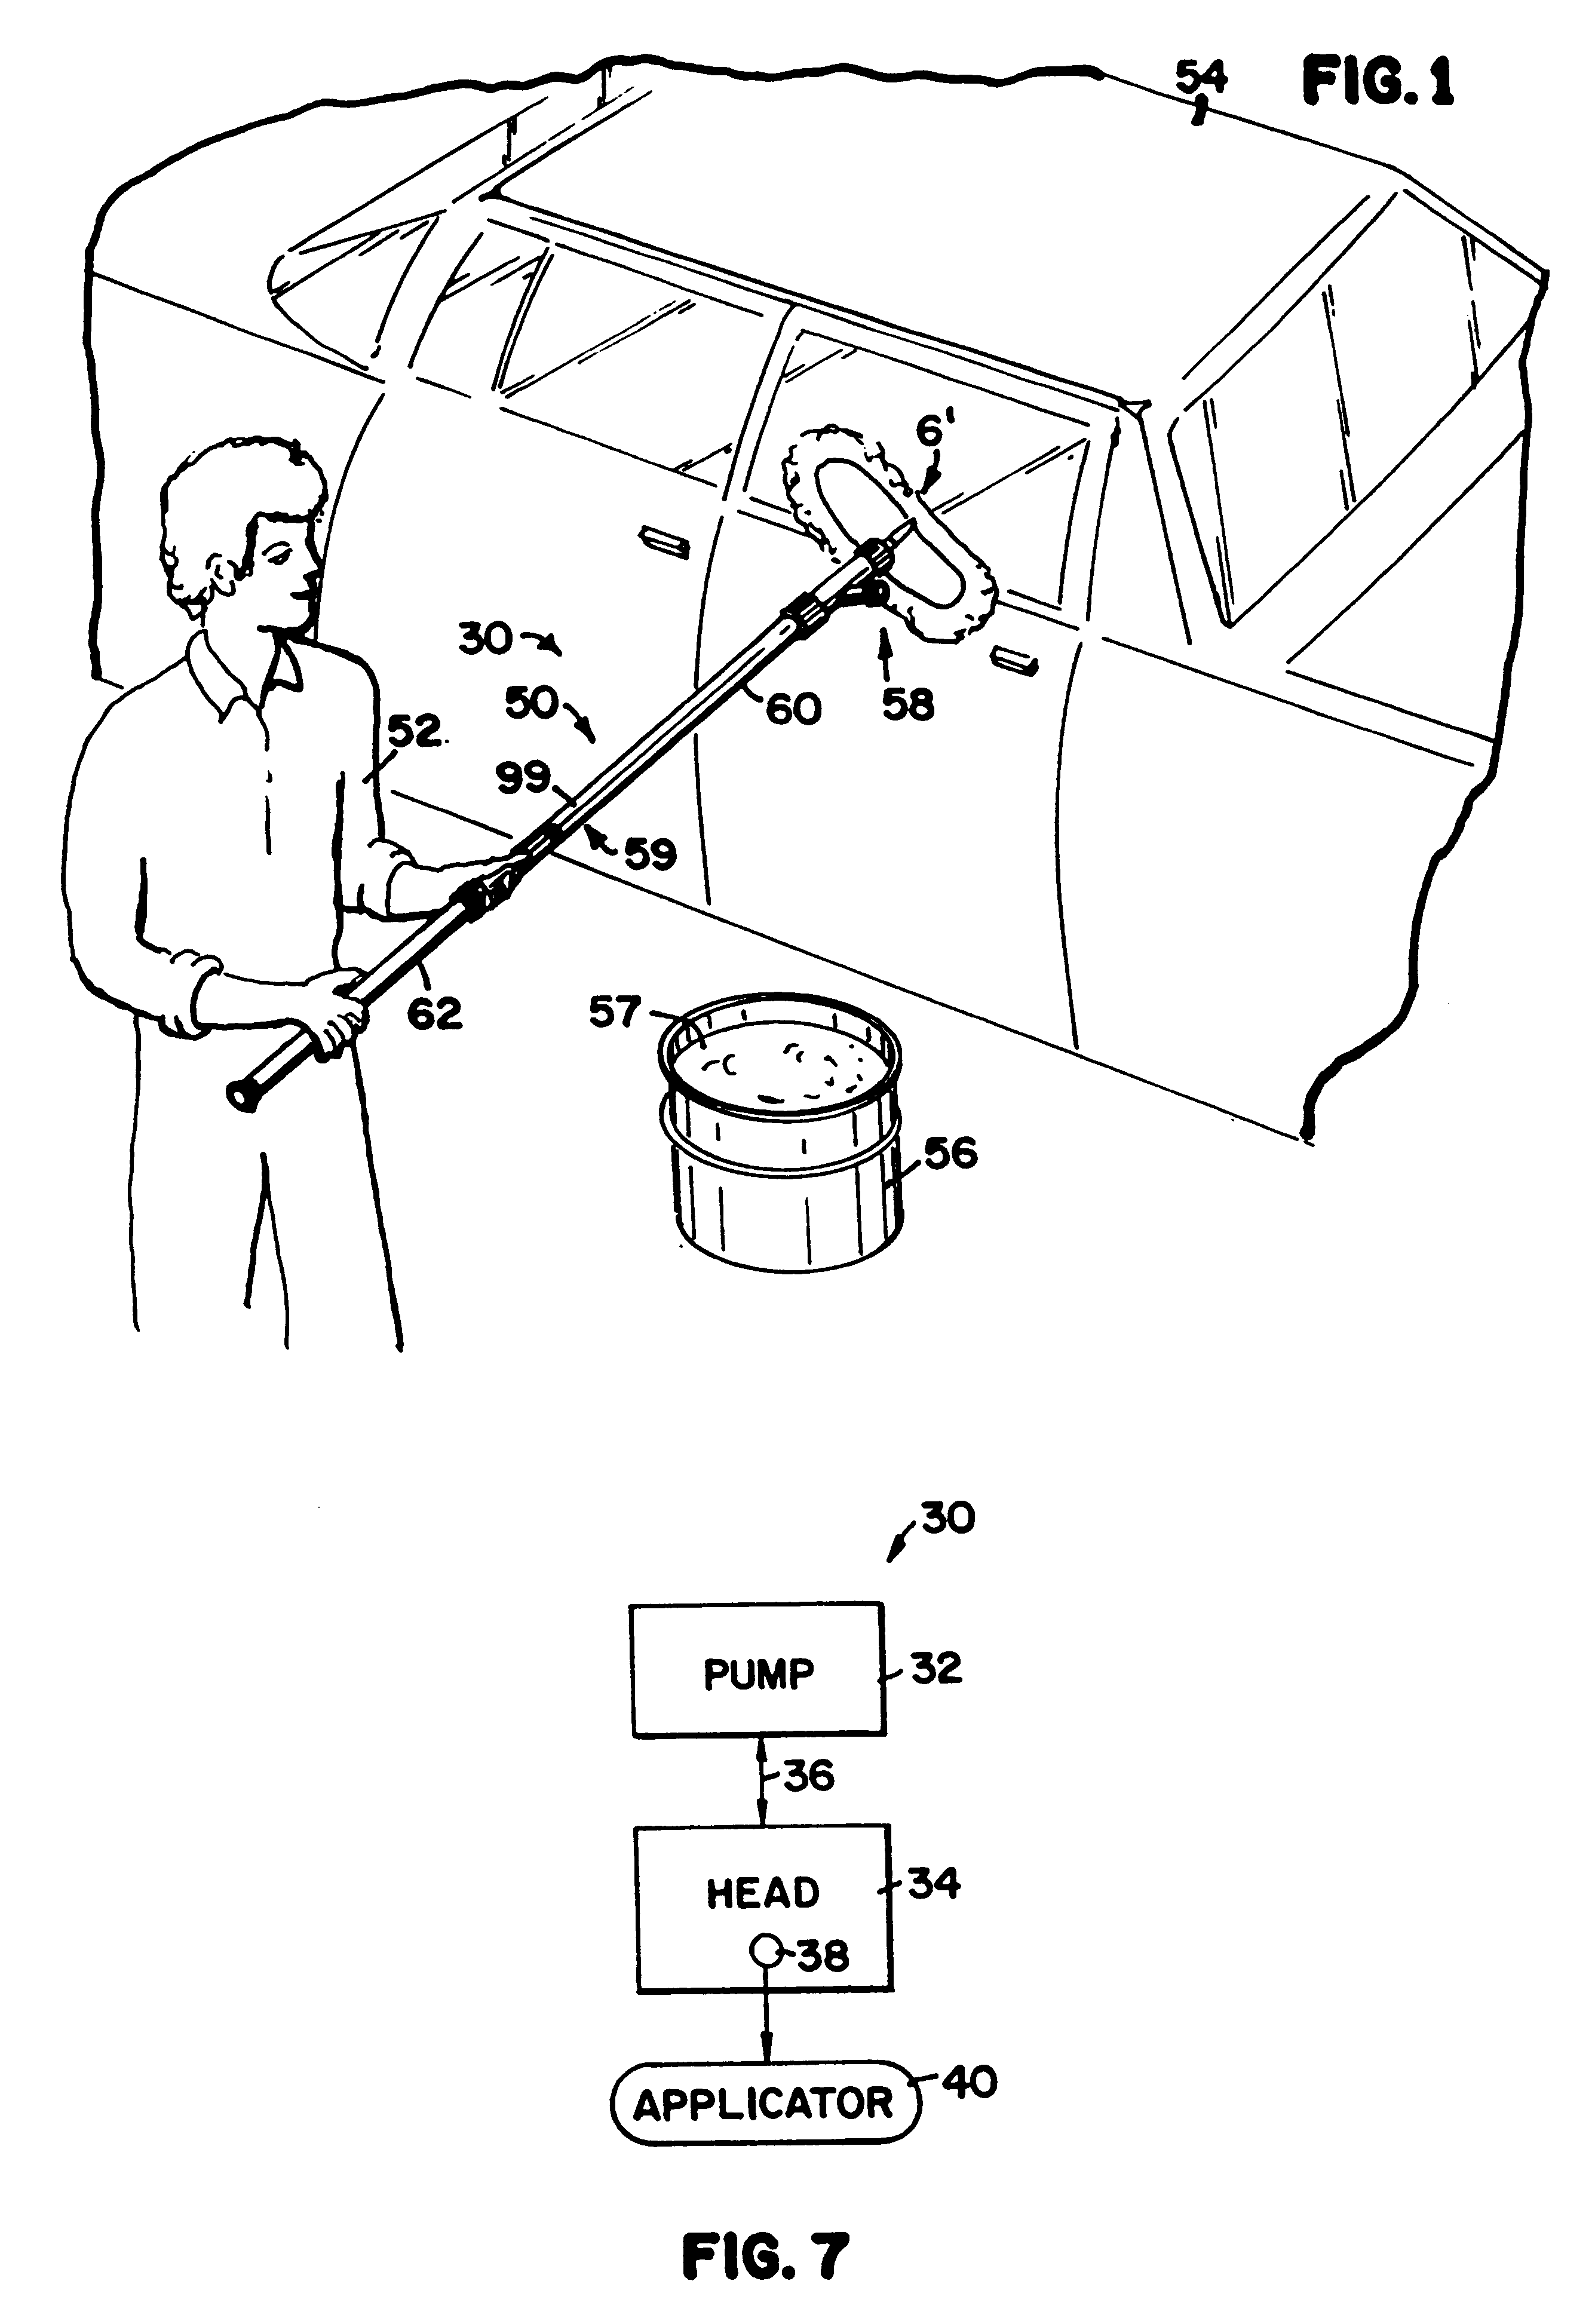 Liquid dispenser and distribution apparatus for washing structures, and methods